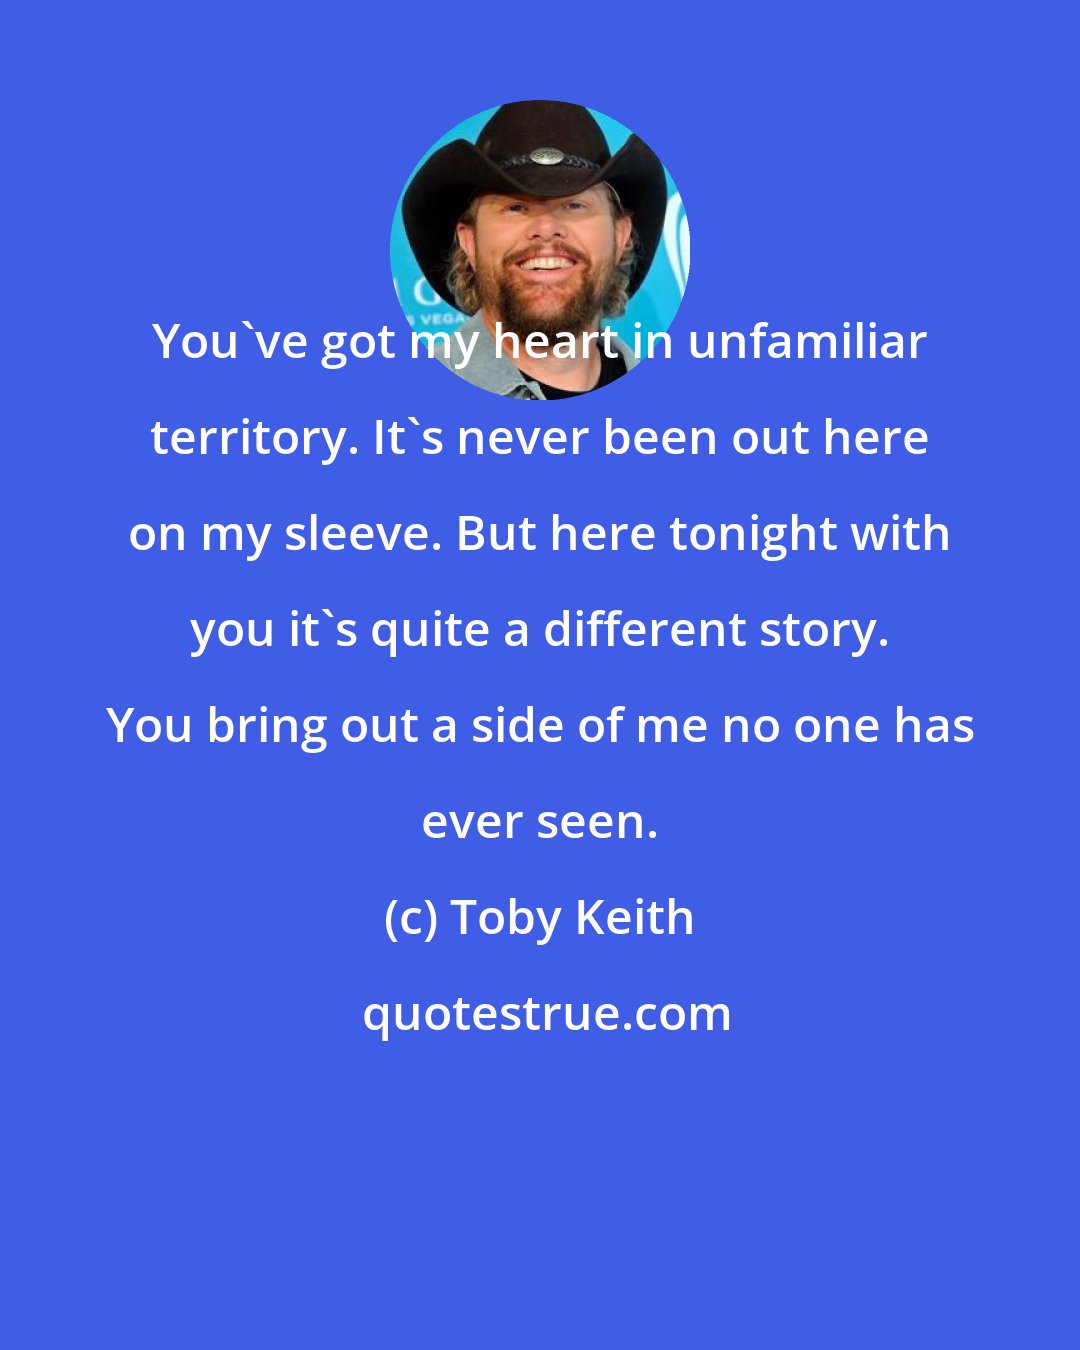 Toby Keith: You've got my heart in unfamiliar territory. It's never been out here on my sleeve. But here tonight with you it's quite a different story. You bring out a side of me no one has ever seen.